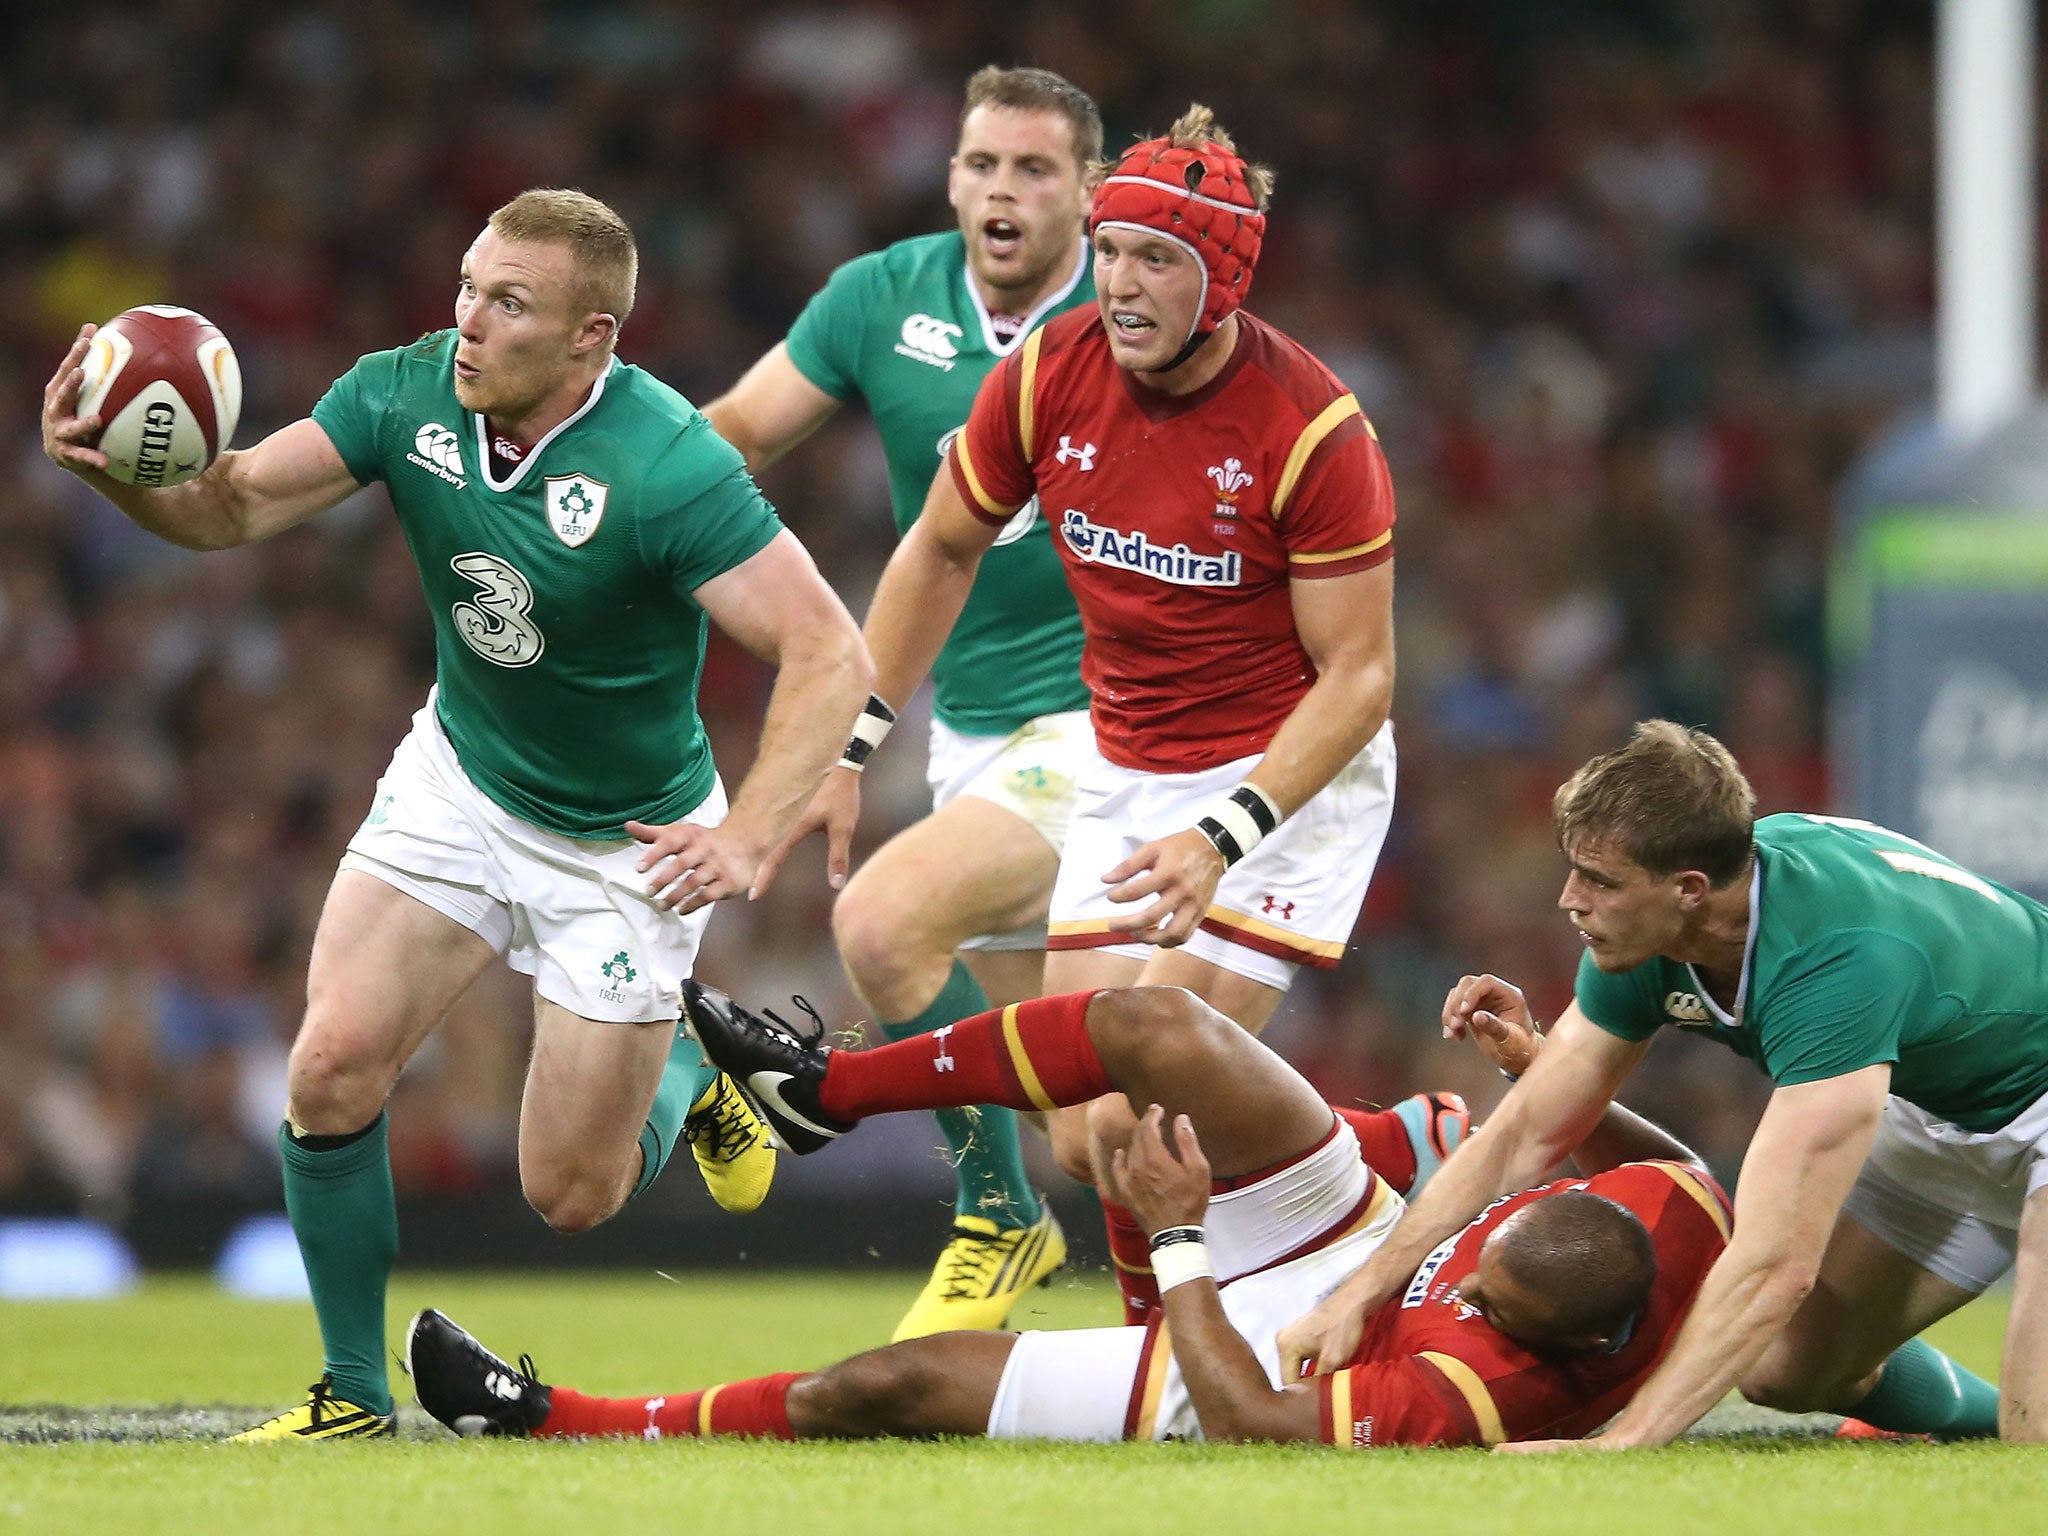 Keith Earls skips clear to score Ireland's third try in Cardiff